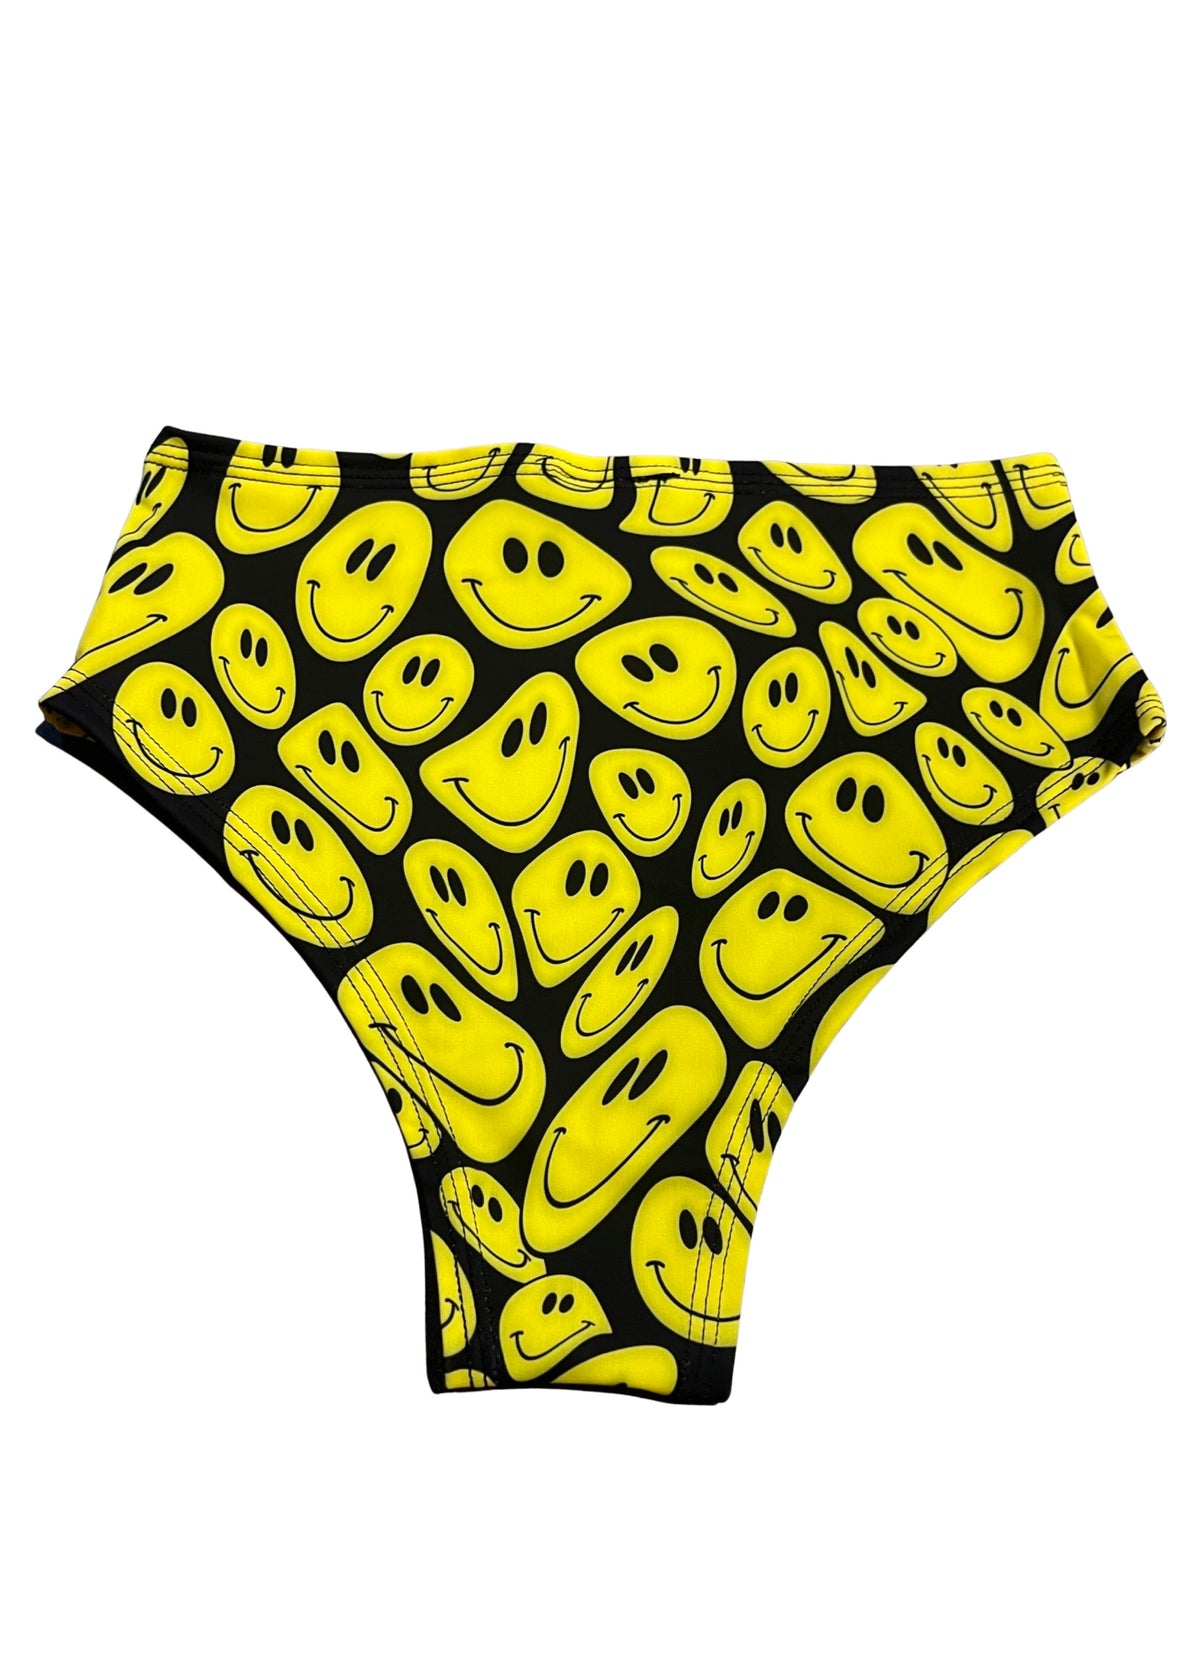 Yellow Smiley High Waisted Bottoms